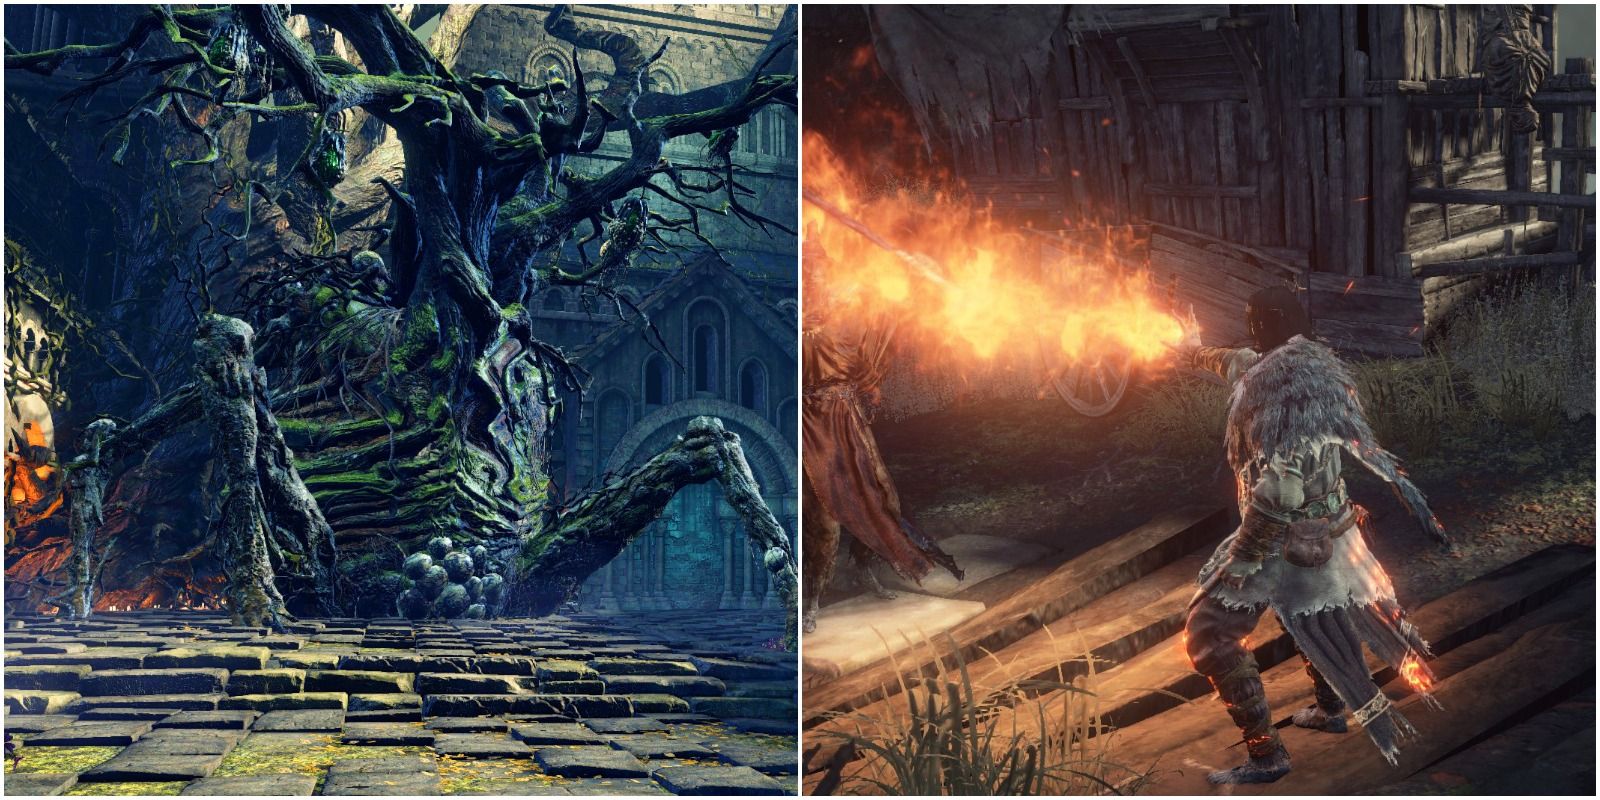 the tree boss and a pyromancer using flame surge.